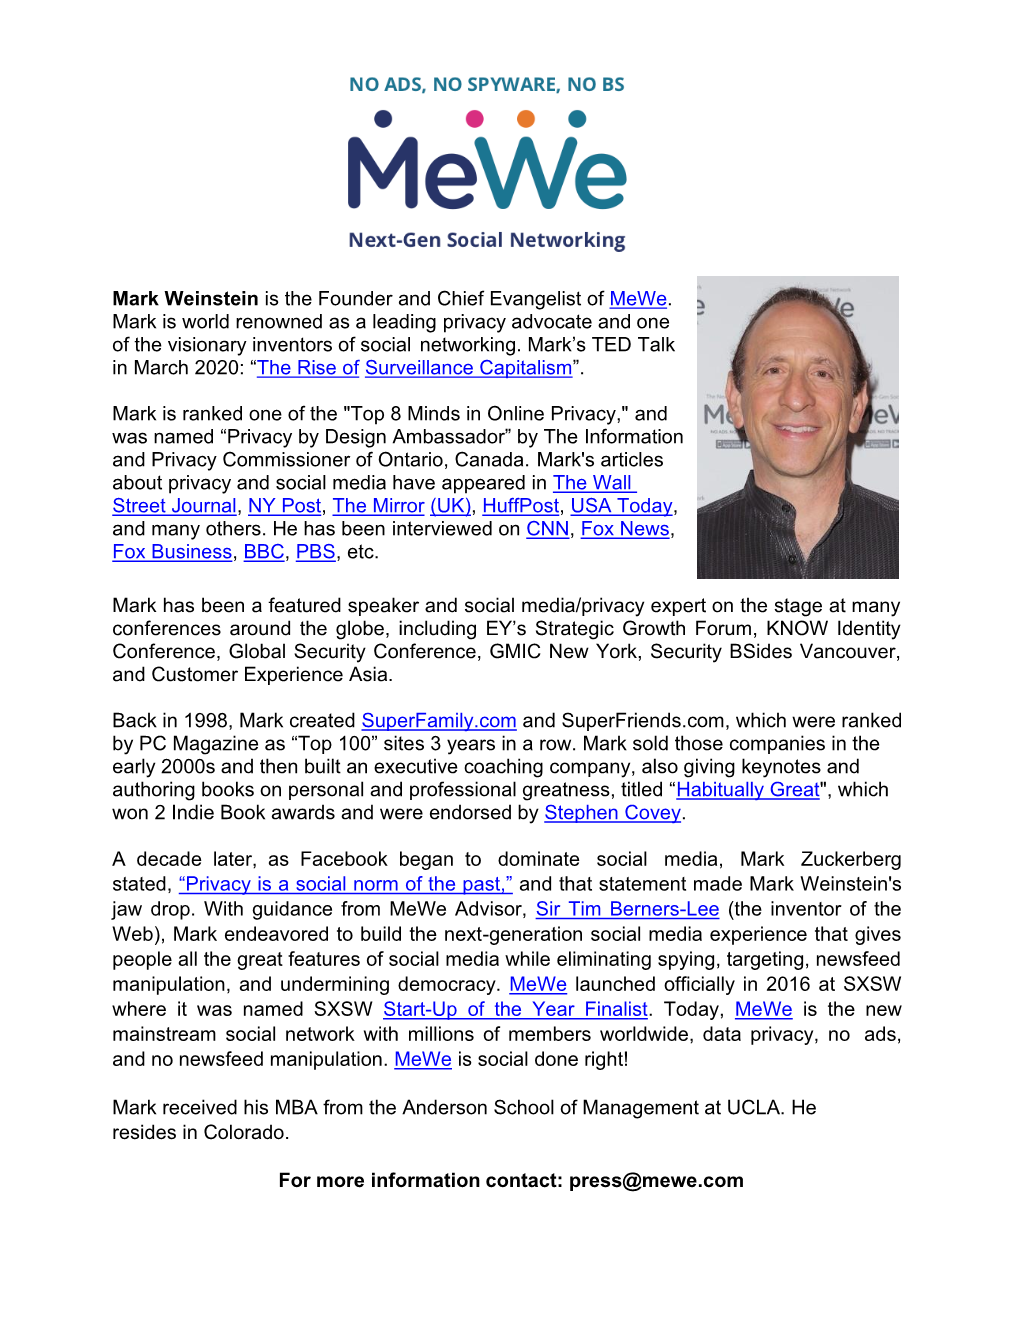 Mark Weinstein Is the Founder and Chief Evangelist of Mewe. Mark Is World Renowned As a Leading Privacy Advocate and One Of